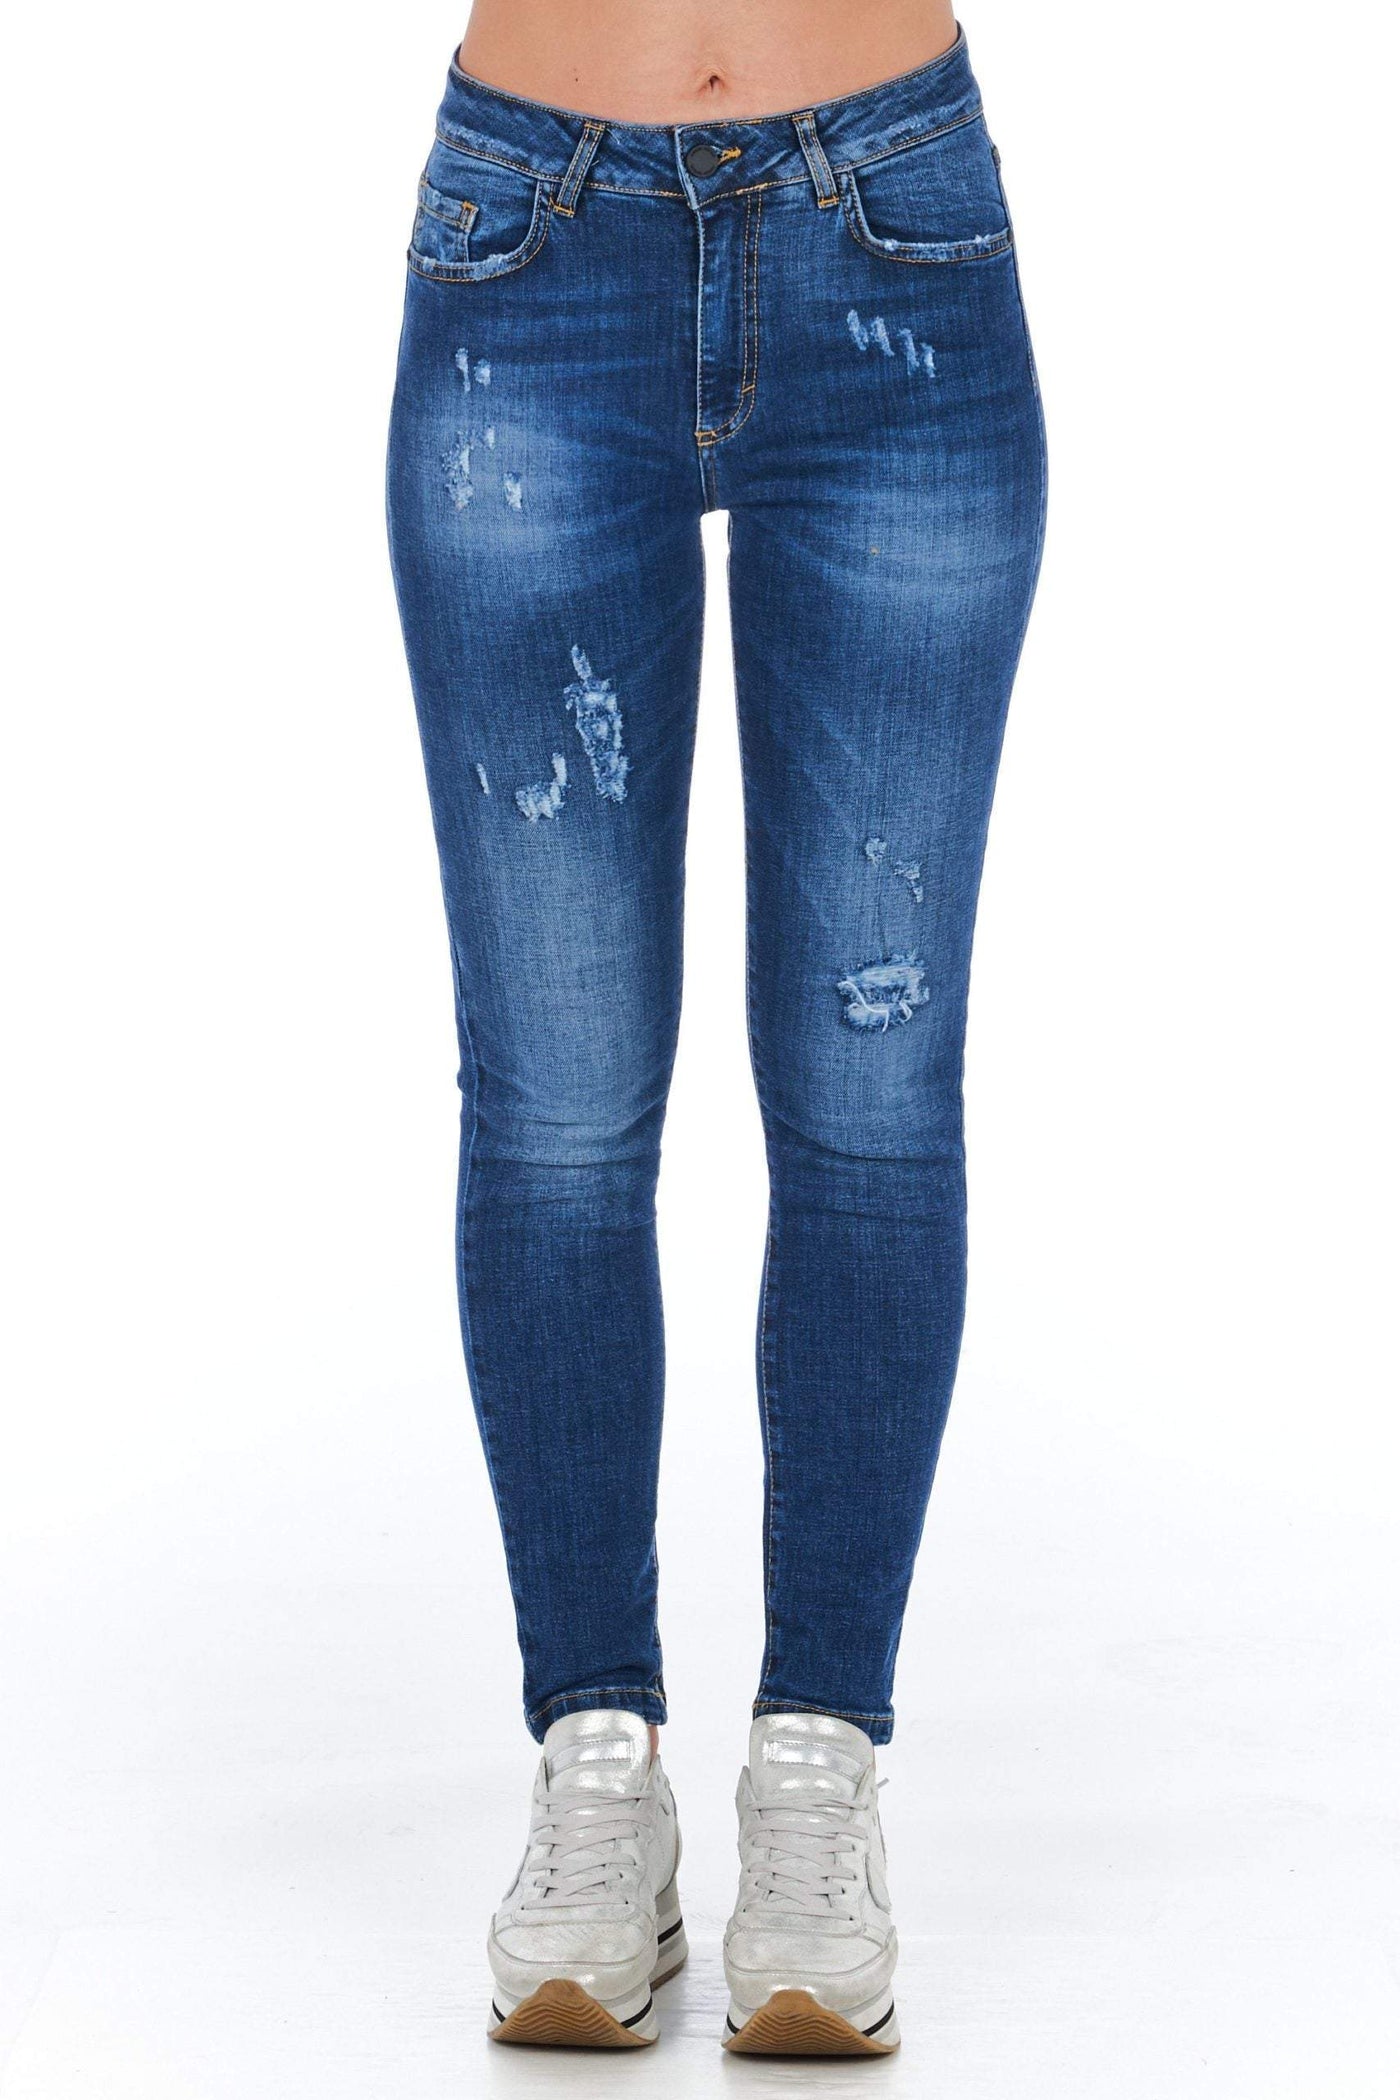 Frankie Morello Blue Jeans & Pant Blue, feed-1, Frankie Morello, Jeans & Pants - Women - Clothing, W27 | IT41 at SEYMAYKA